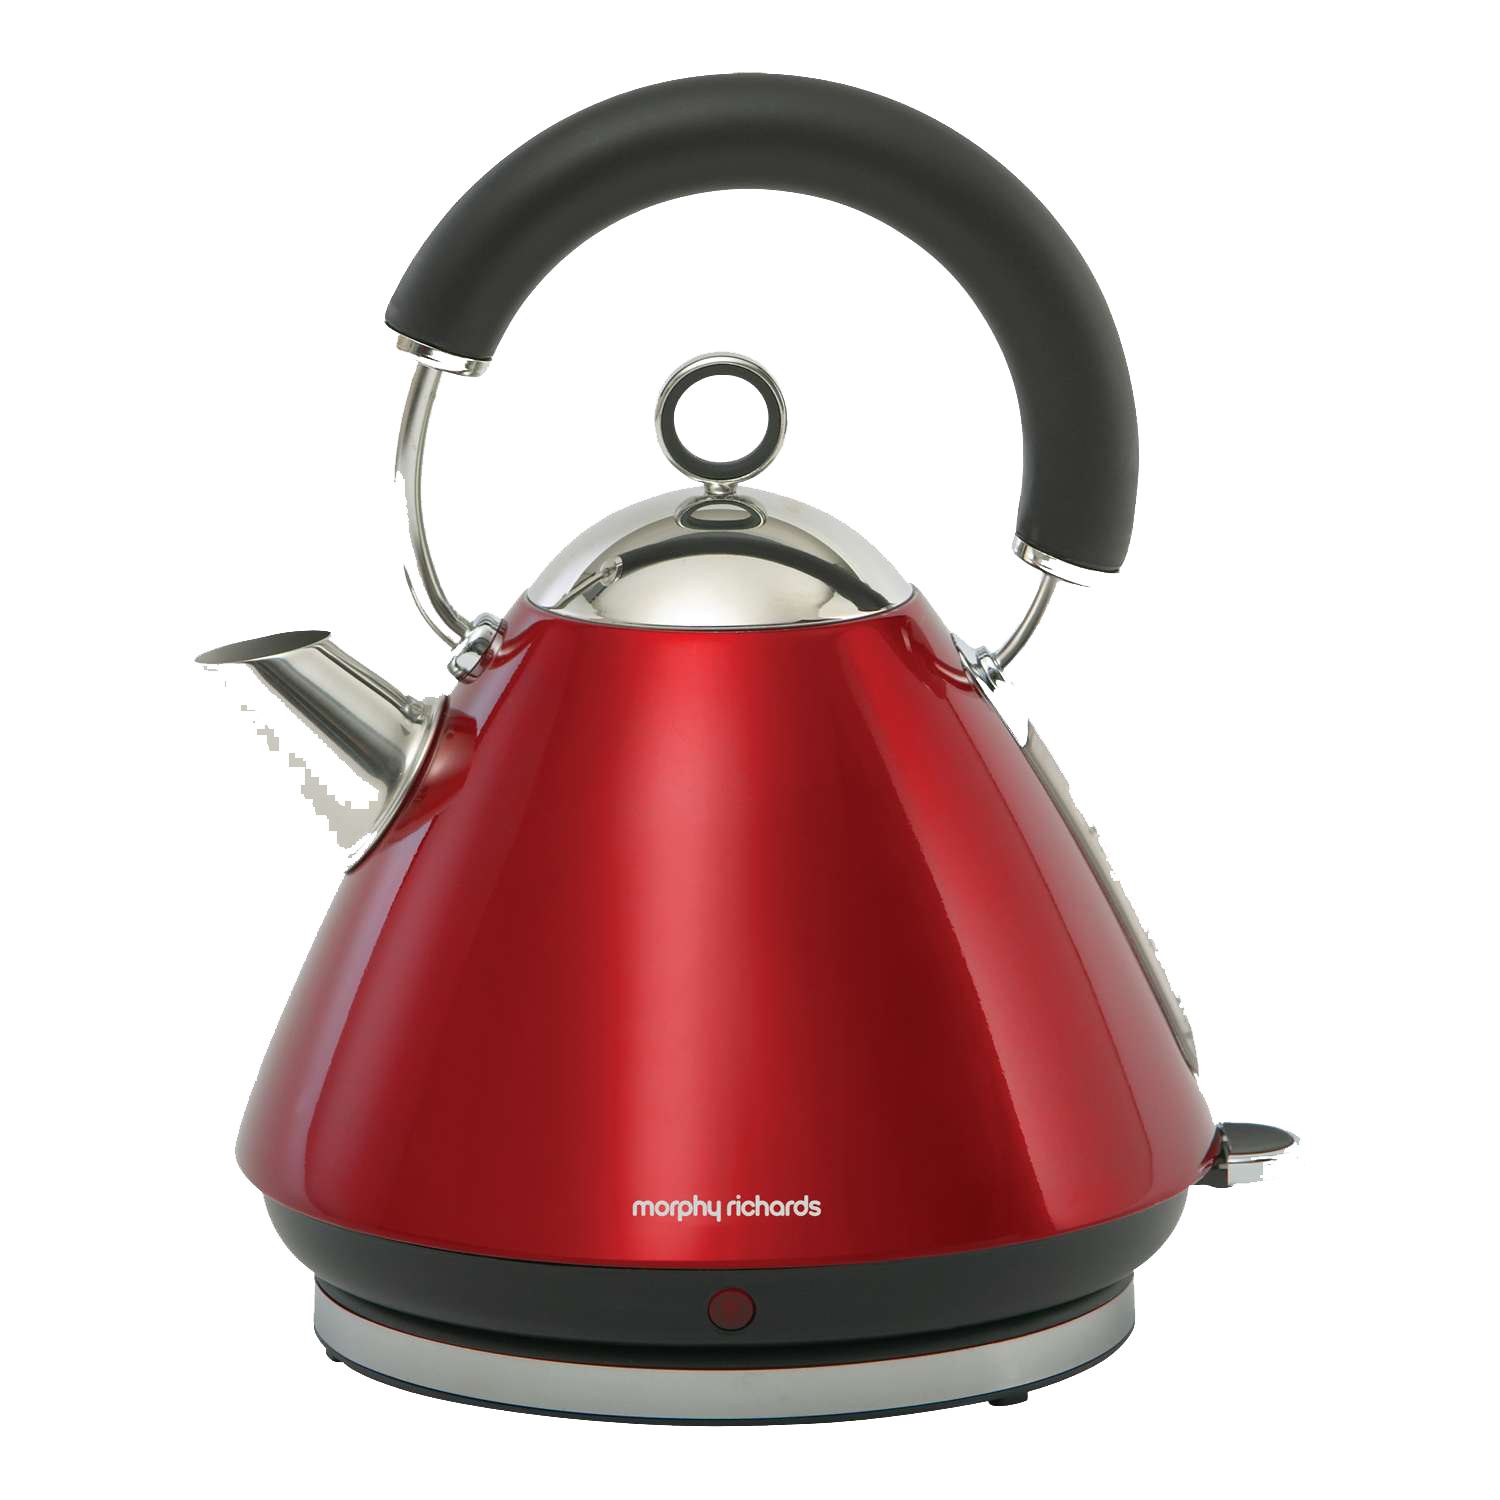 Kettle Free Png Immagine